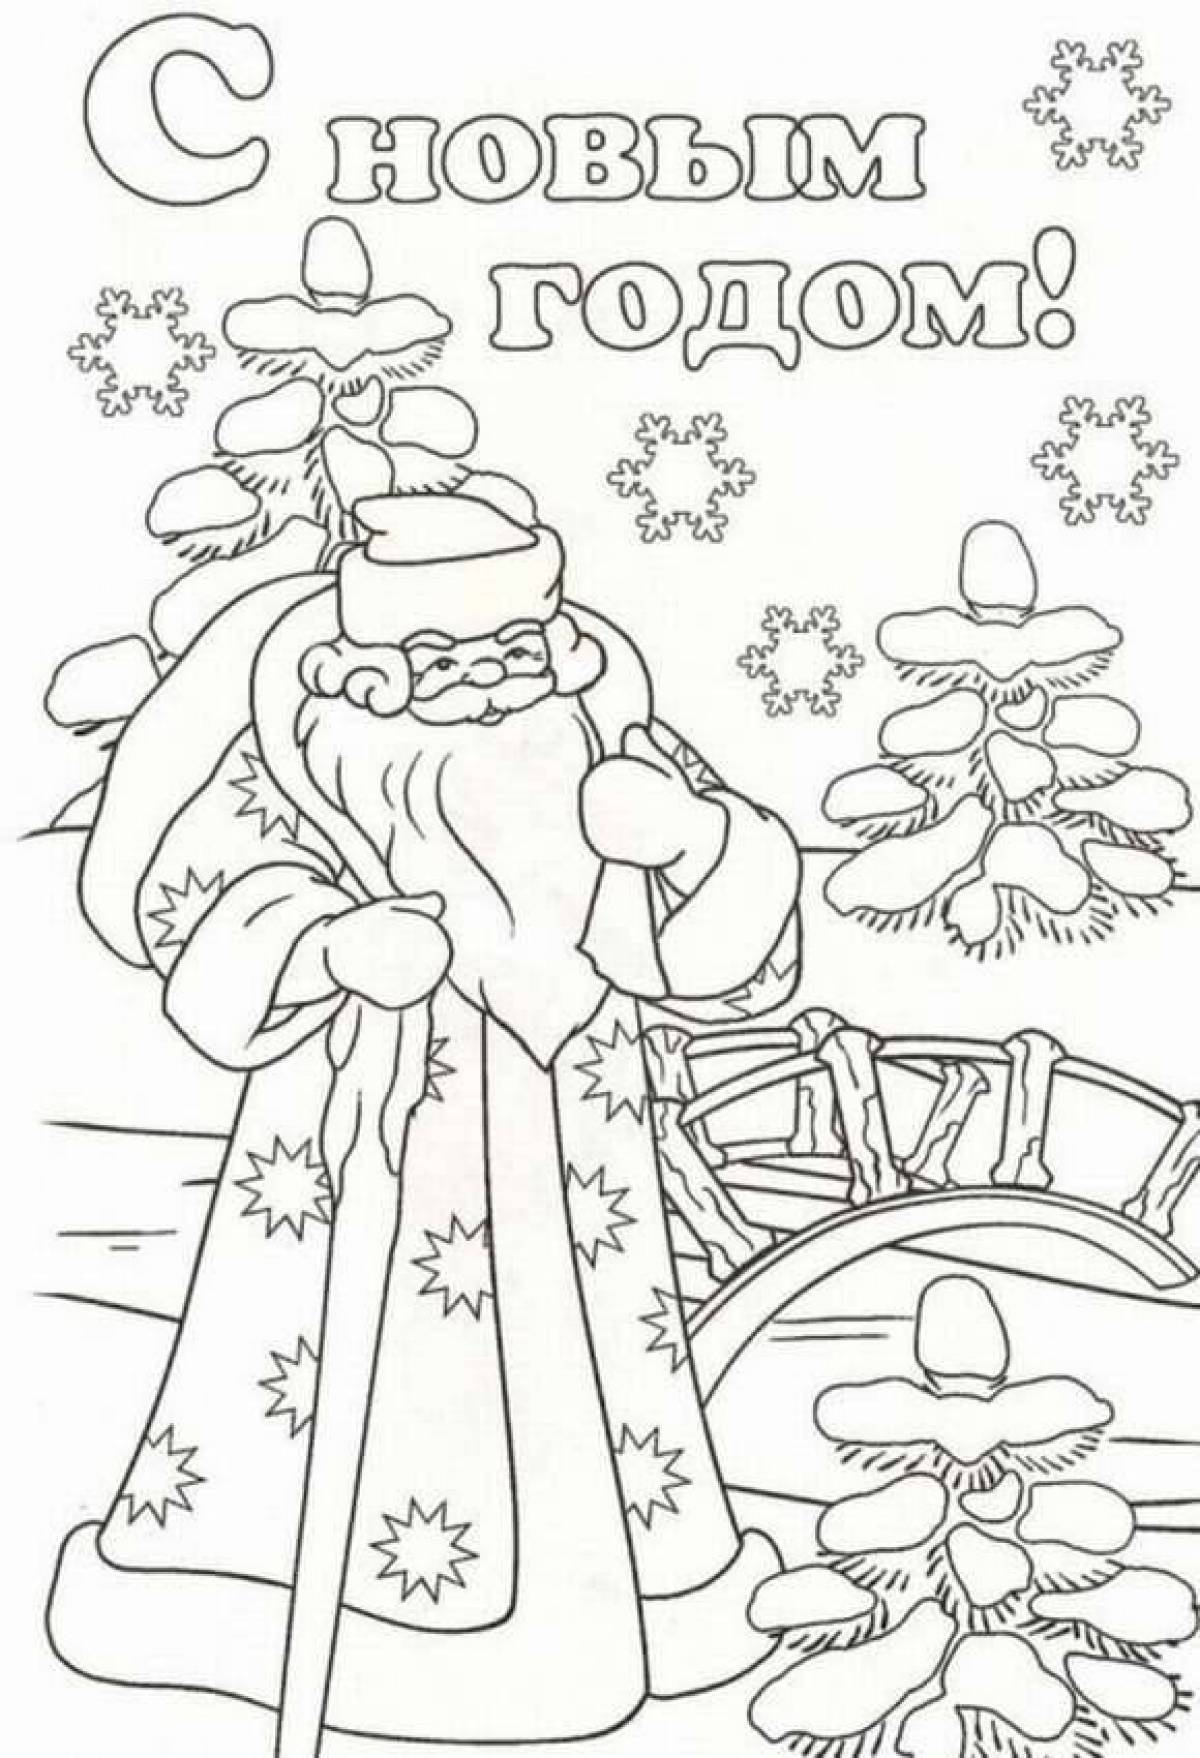 Coloring book twinkling old new year